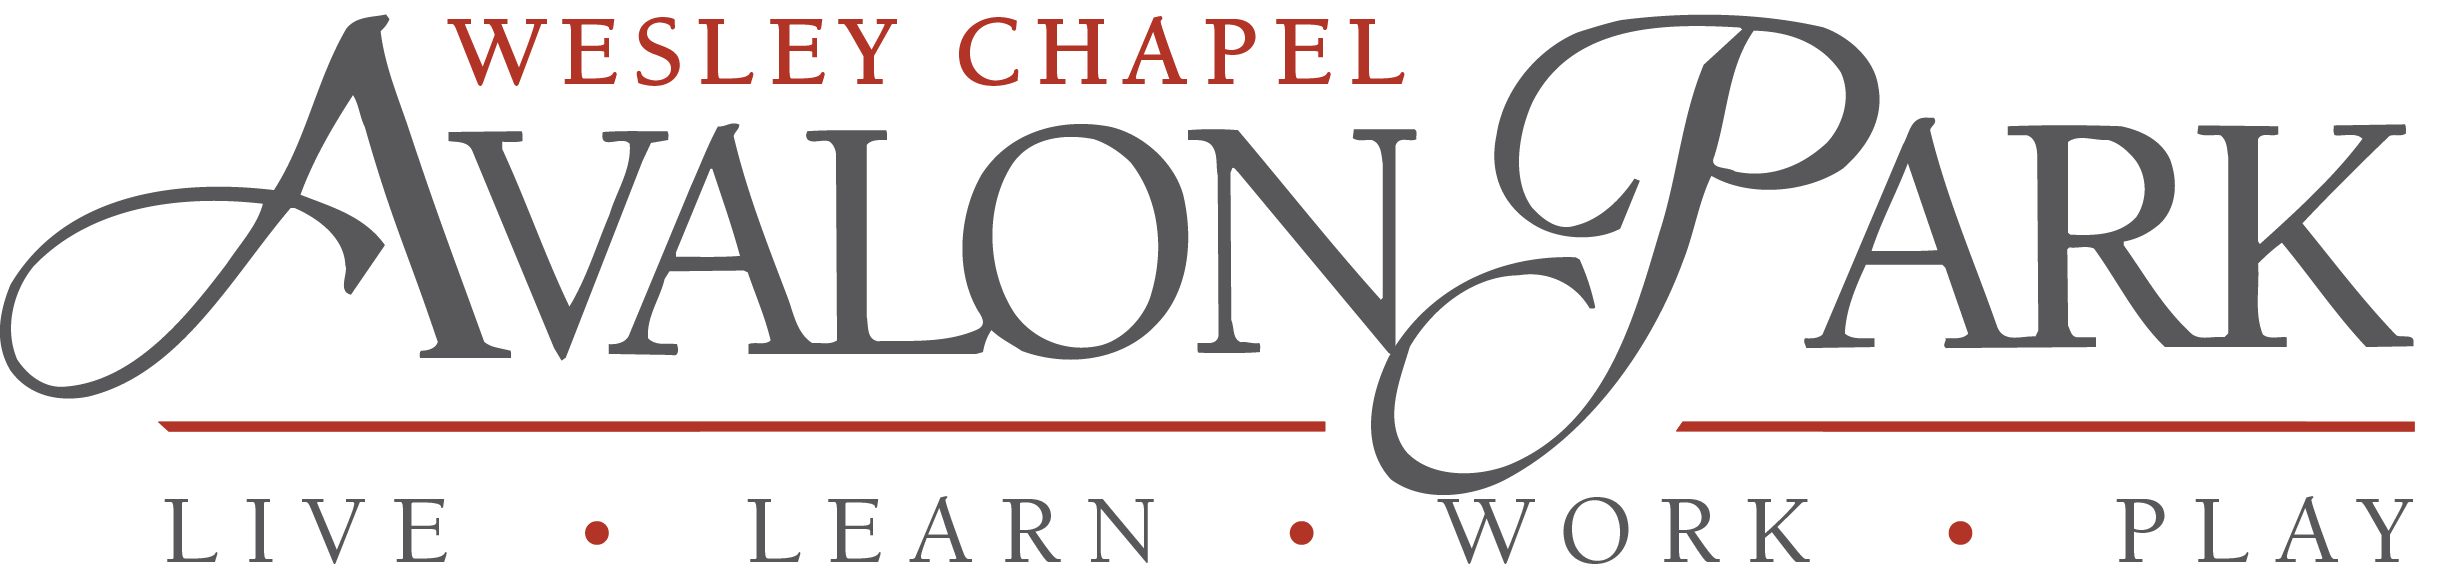 Avalon Park Wesley Chapel - Live Learn Work and Play Logo